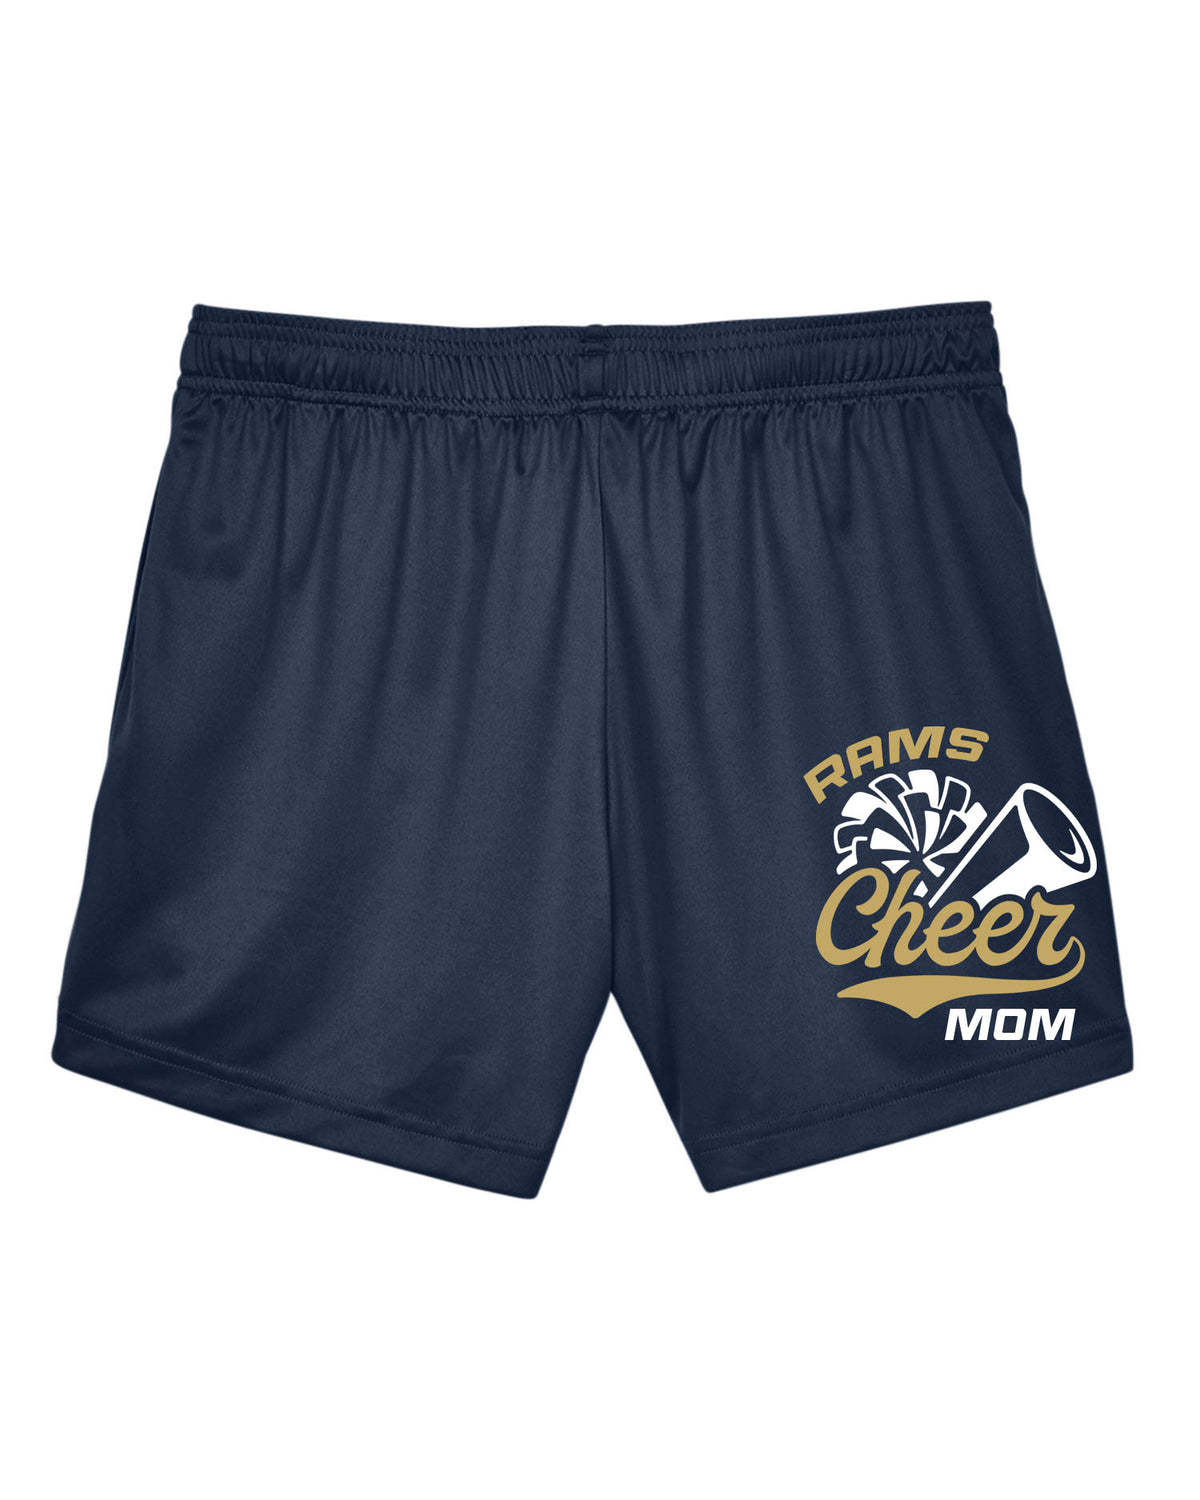 Sussex Middle Cheer Ladies Performance Design 1 Shorts